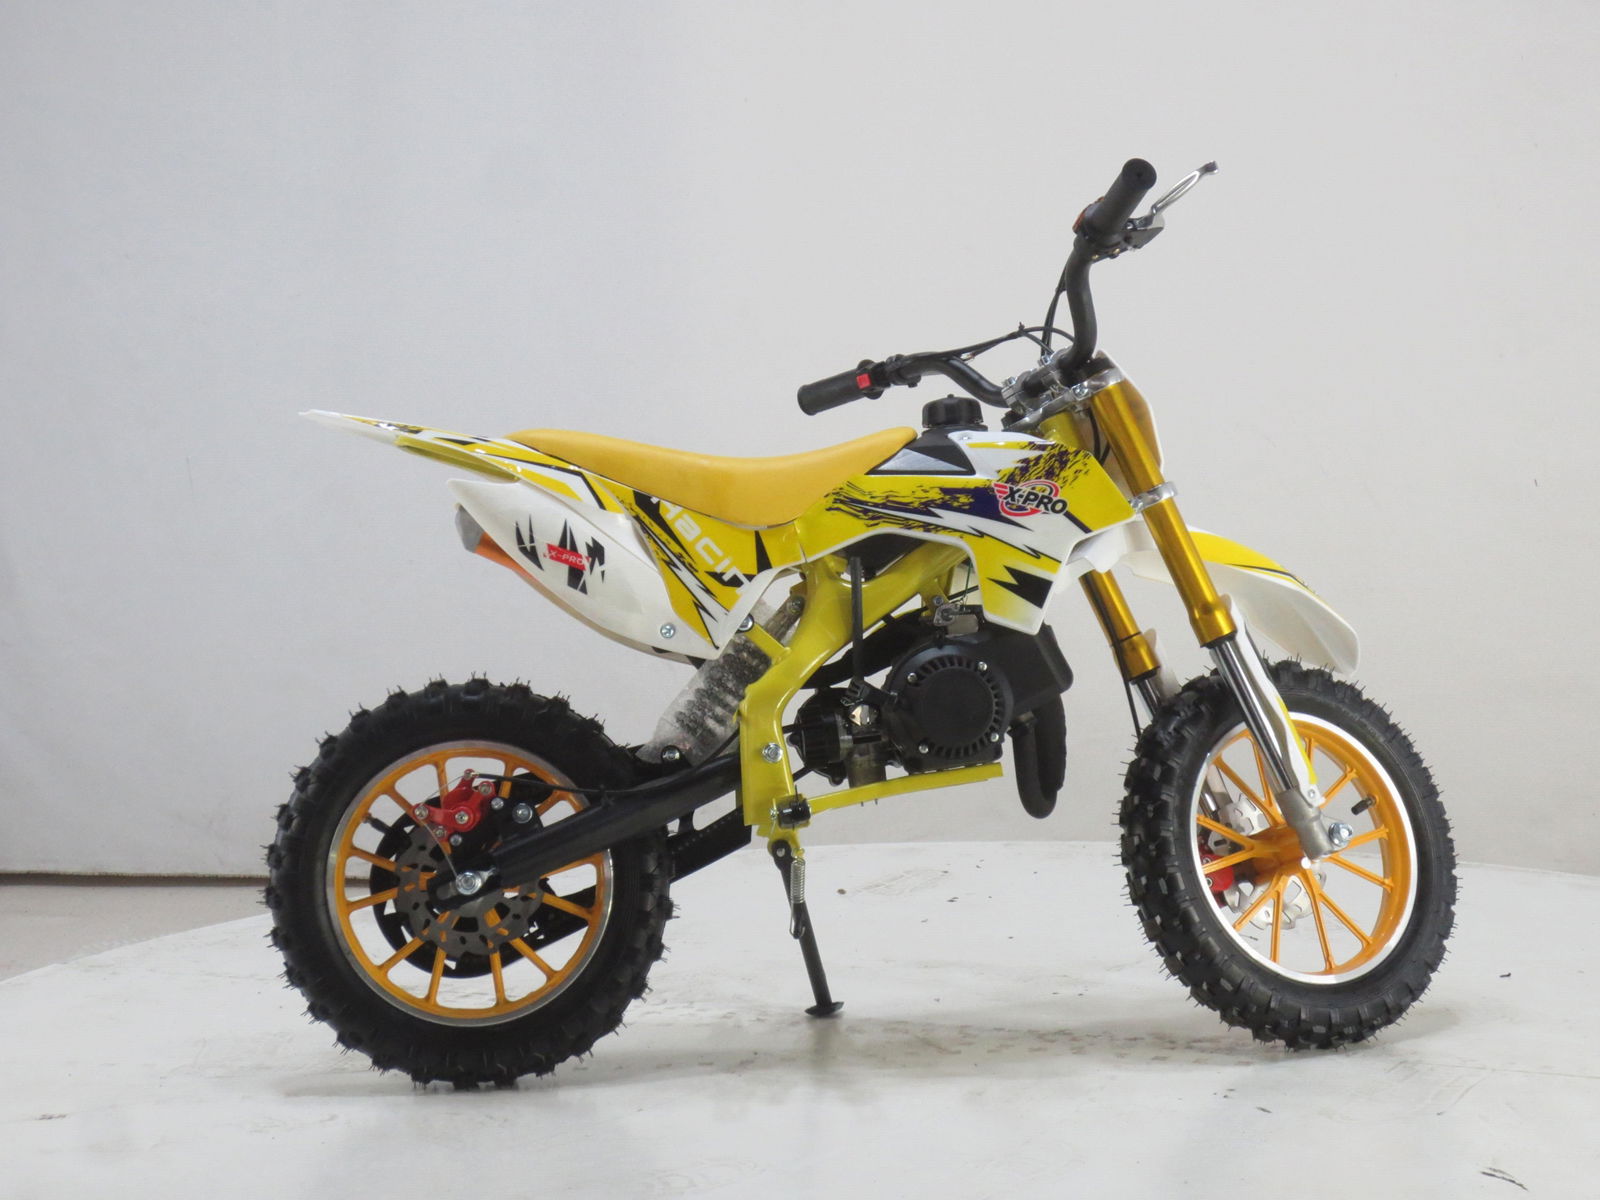 KXD702A 49CC cheap price dirt bike for kids from China factory 2